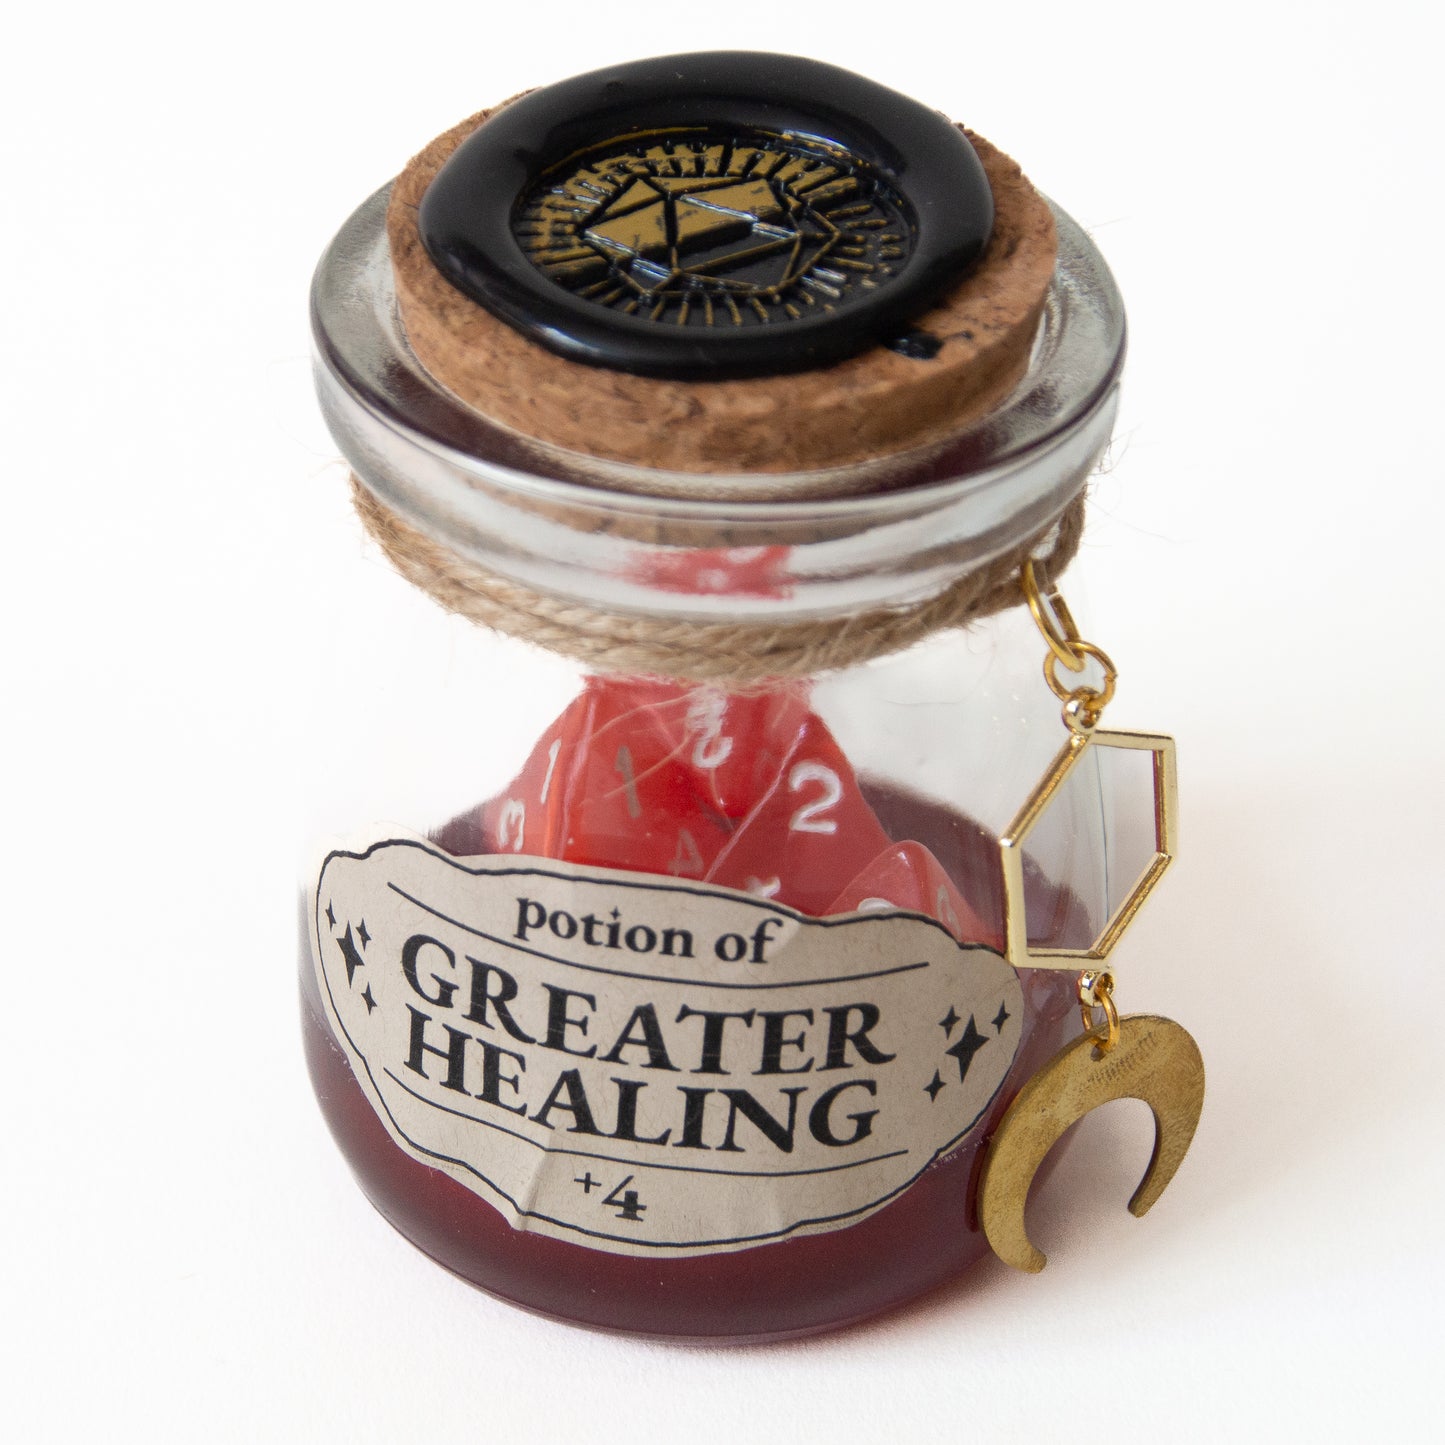 Potion of Greater Healing